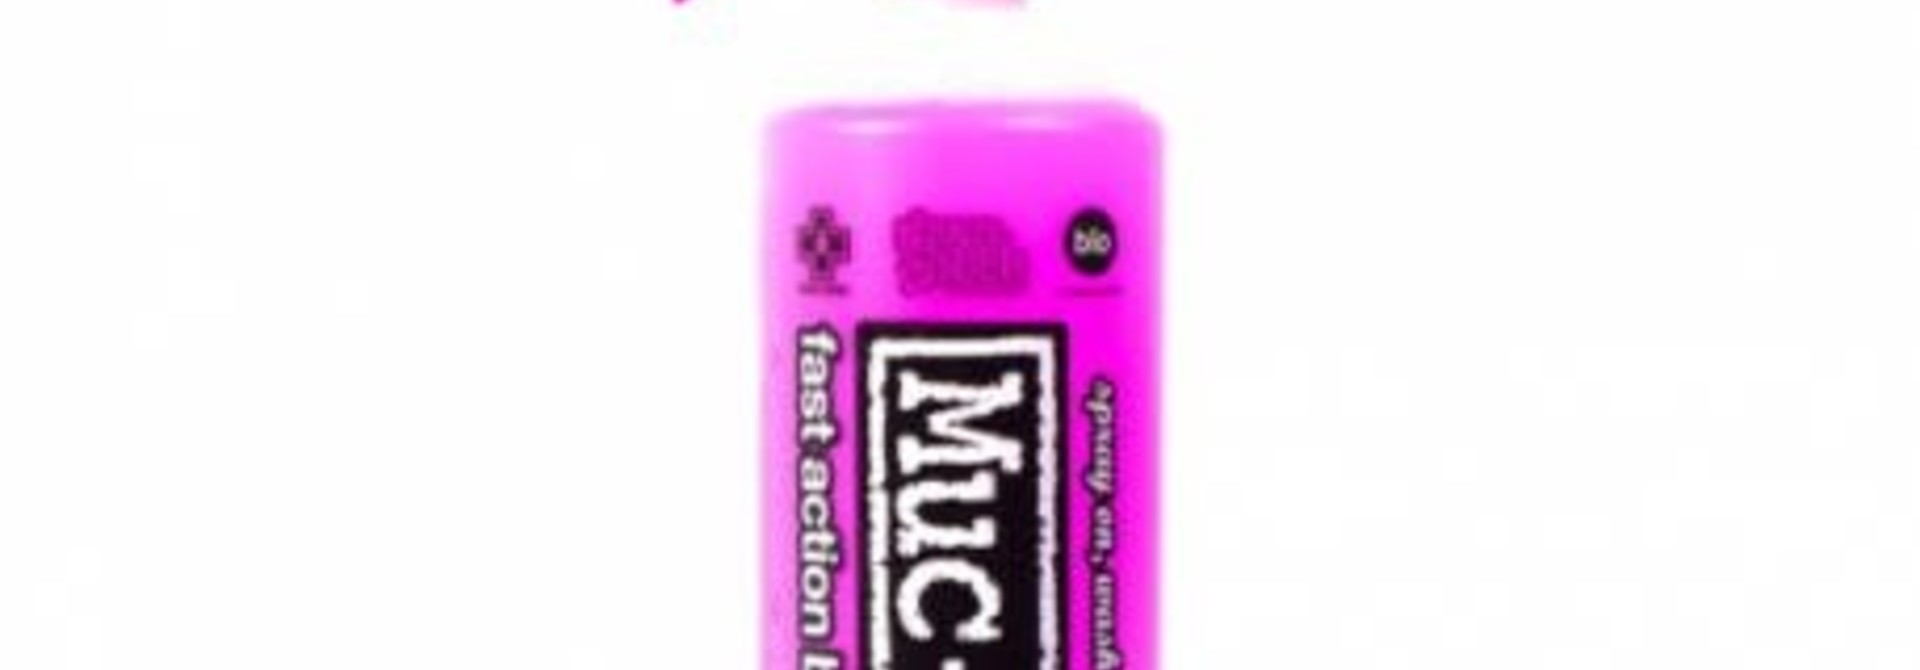 Muc-Off Biodegradable nano Teck Cleaner (1000ml) Capped with Trigger